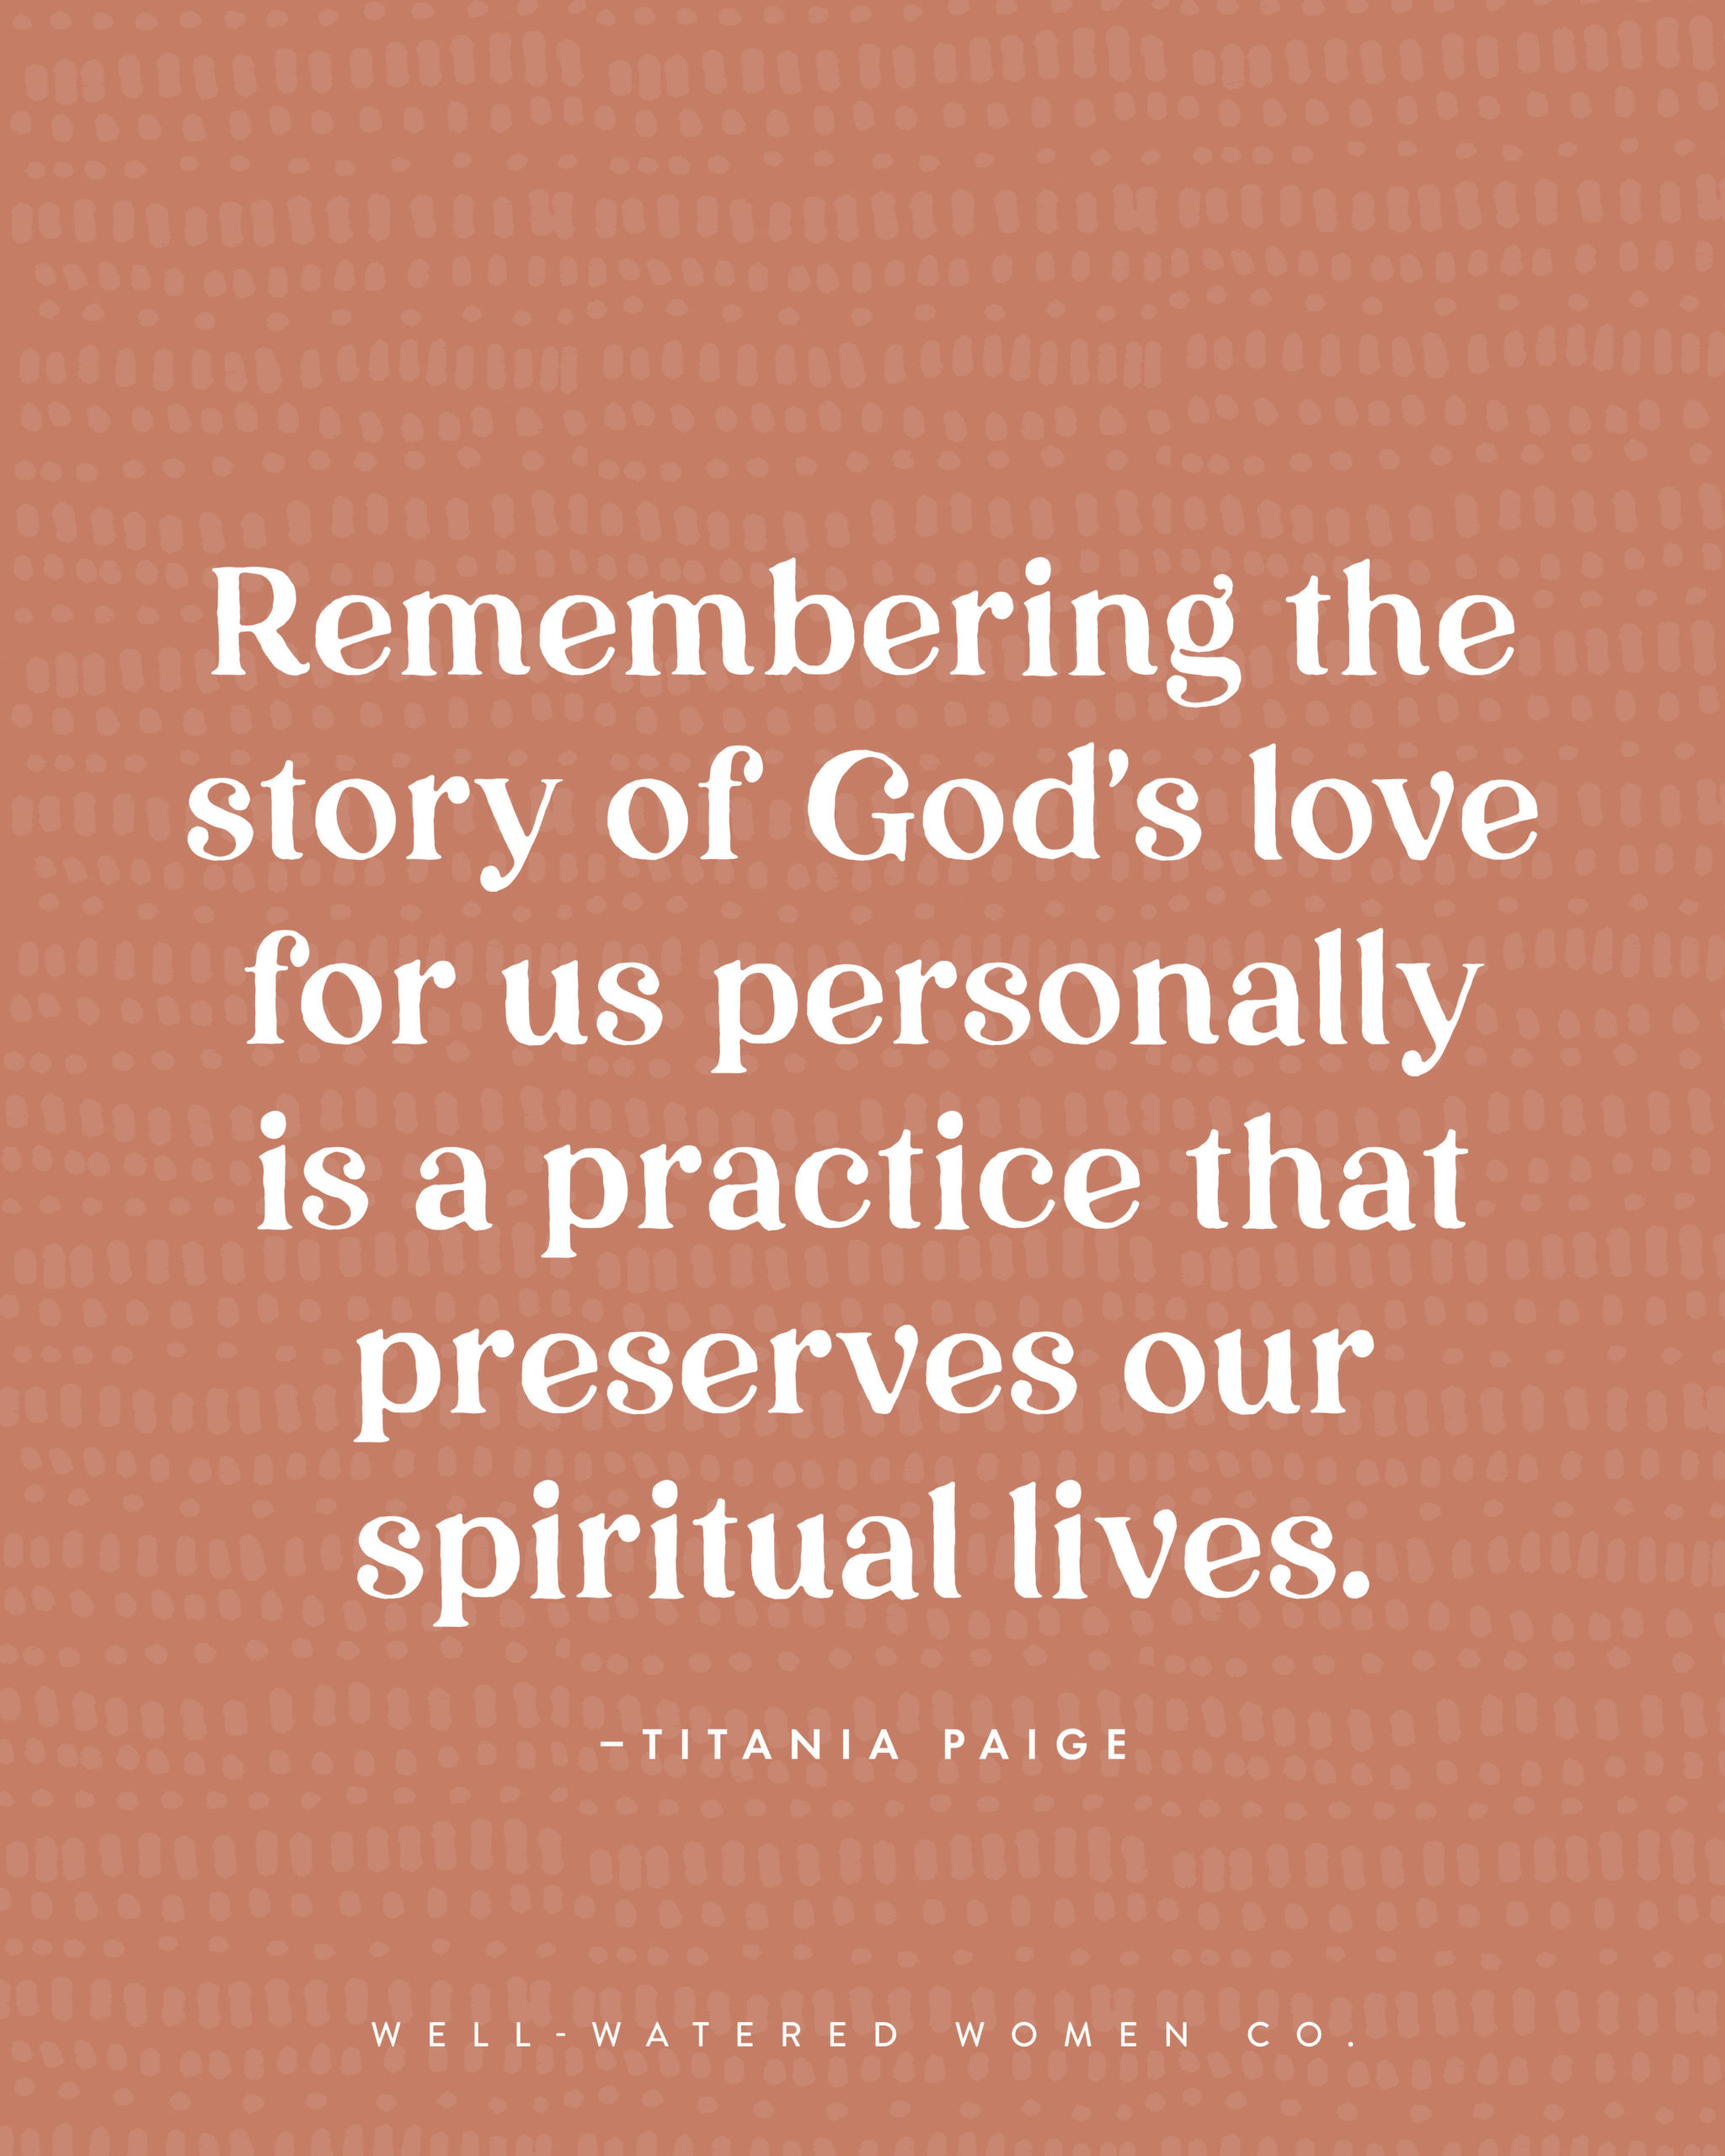 Four Ways to Remember God's Love - an article from Well-Watered Women - quote